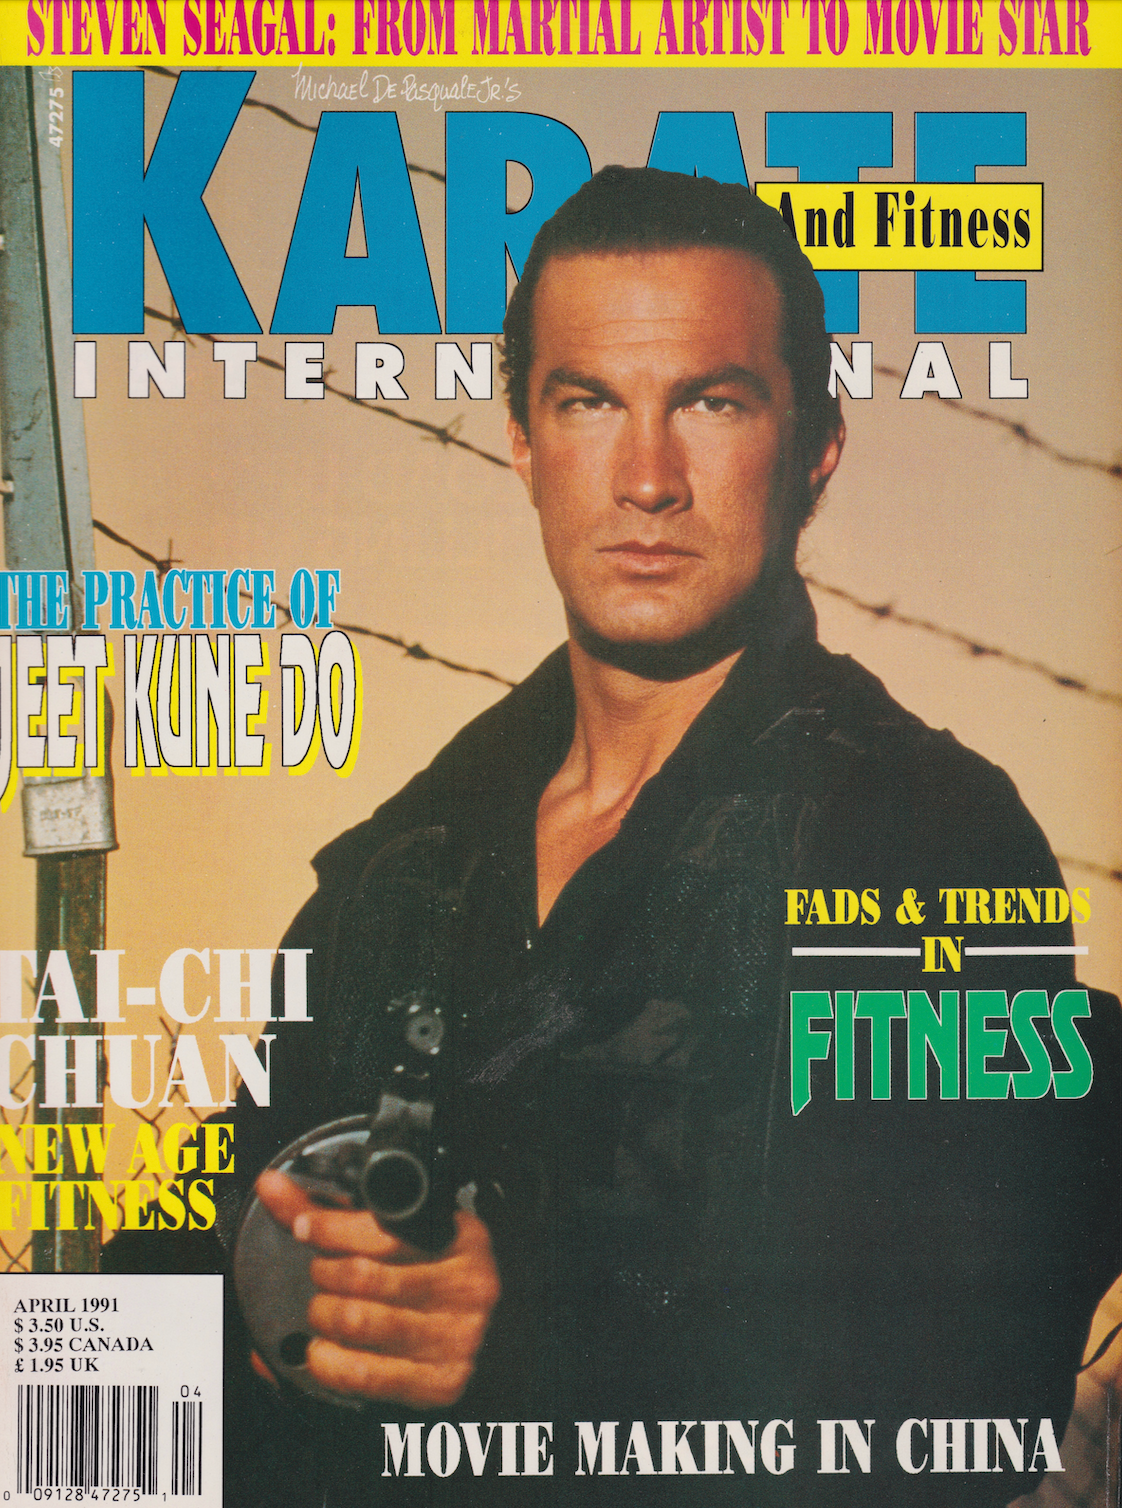 Karate International Magazine 4/91 with Steven Seagal (Preowned)